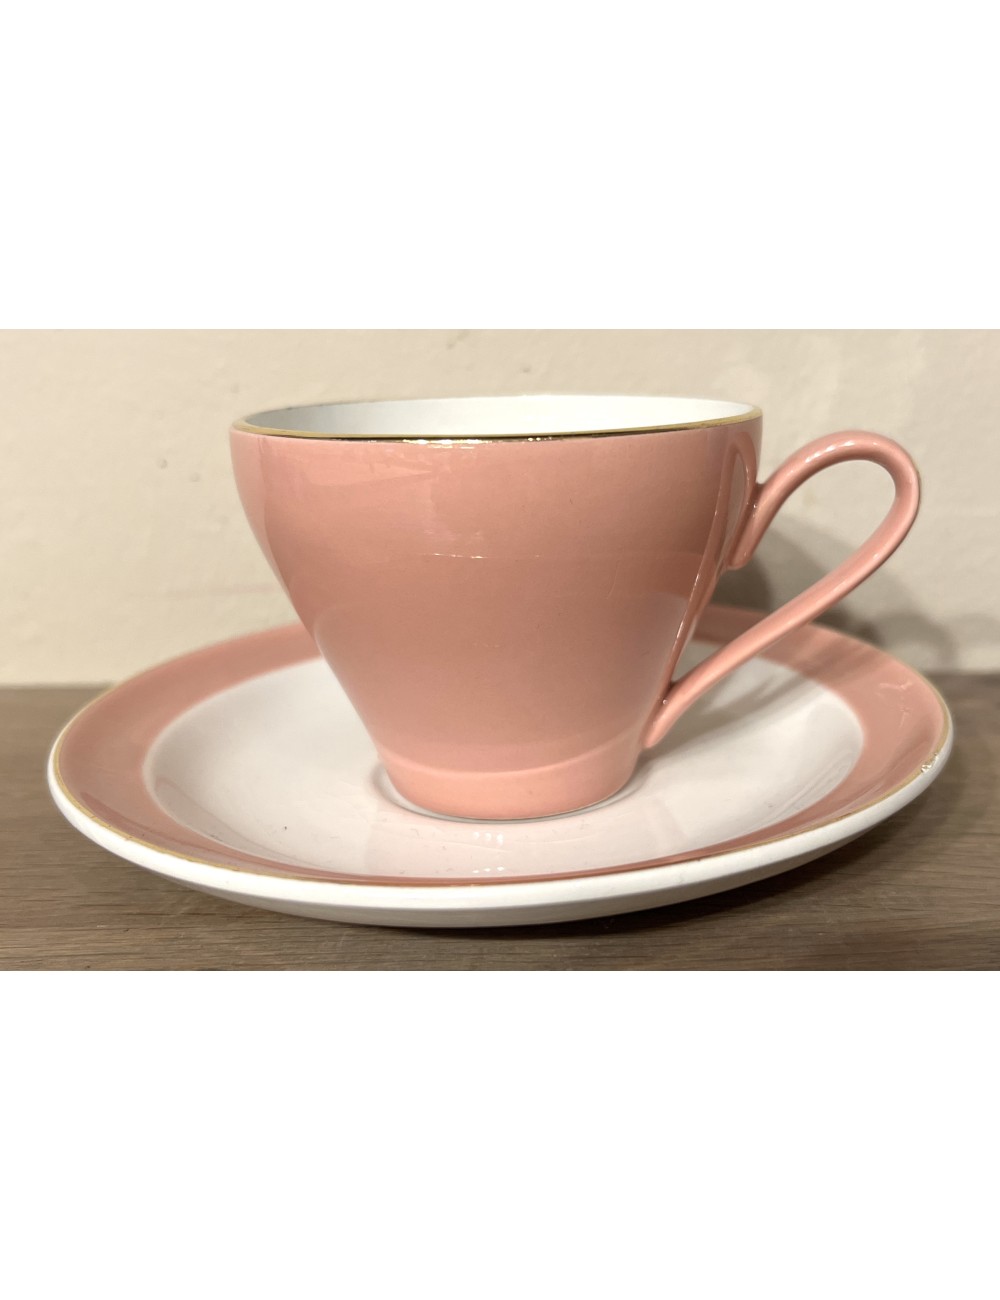 Cup and saucer - Societe Ceramique Maestricht - executed in pastel pink color